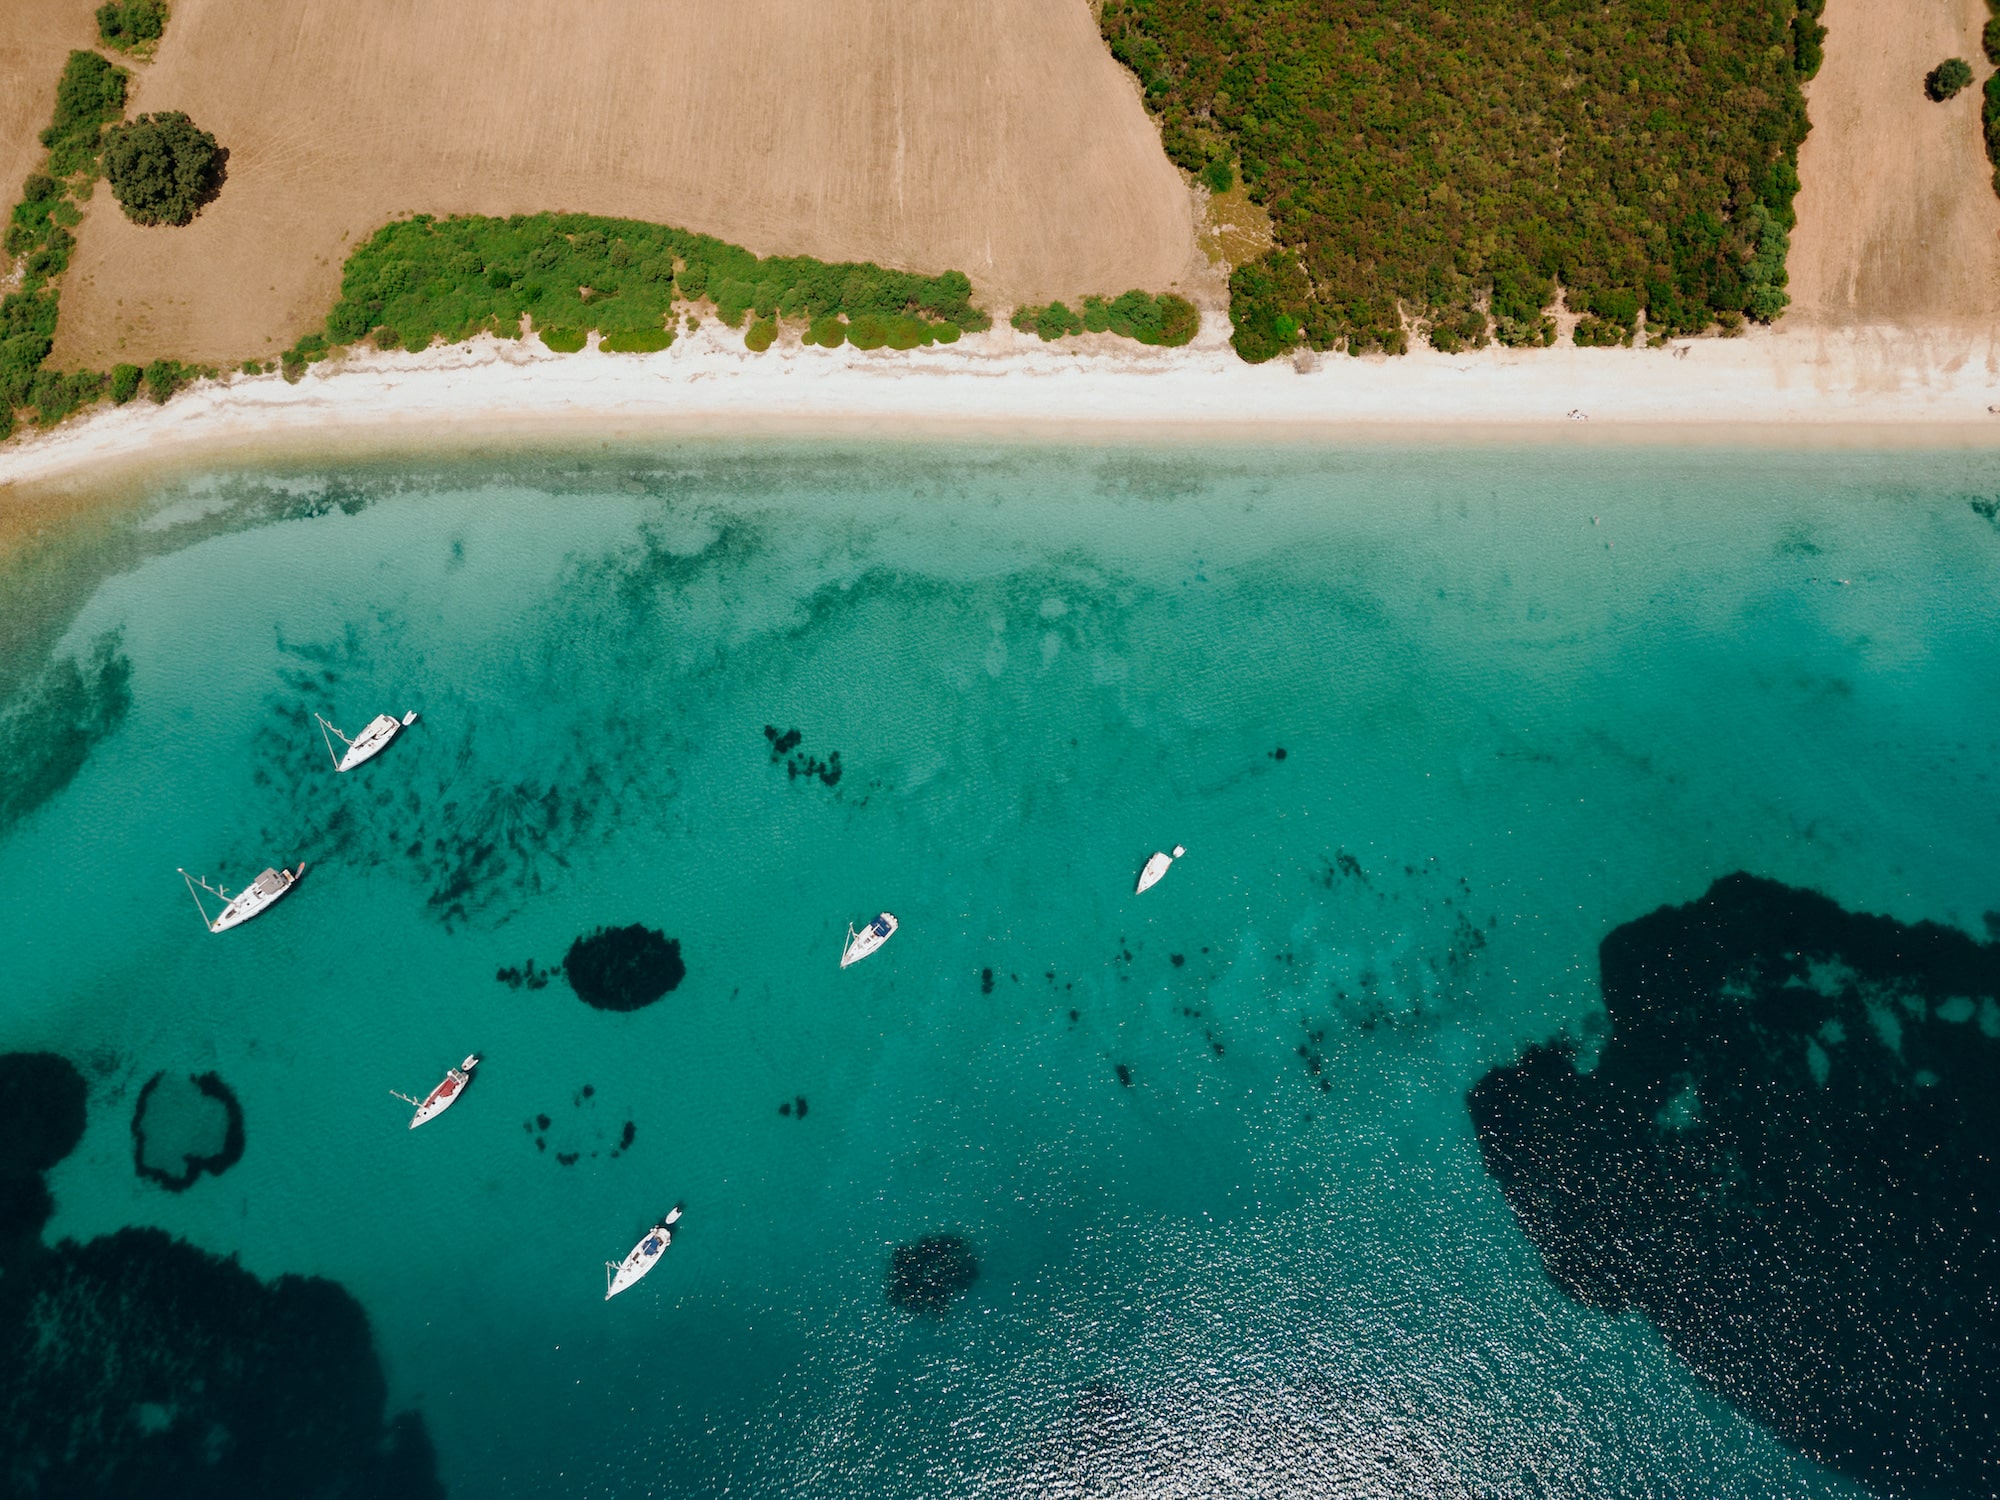 A drone image showing the beautiful Vathiavali Beach close to Paleros Greece. The image shows sailing boats and a stripe of sand with trees in the background